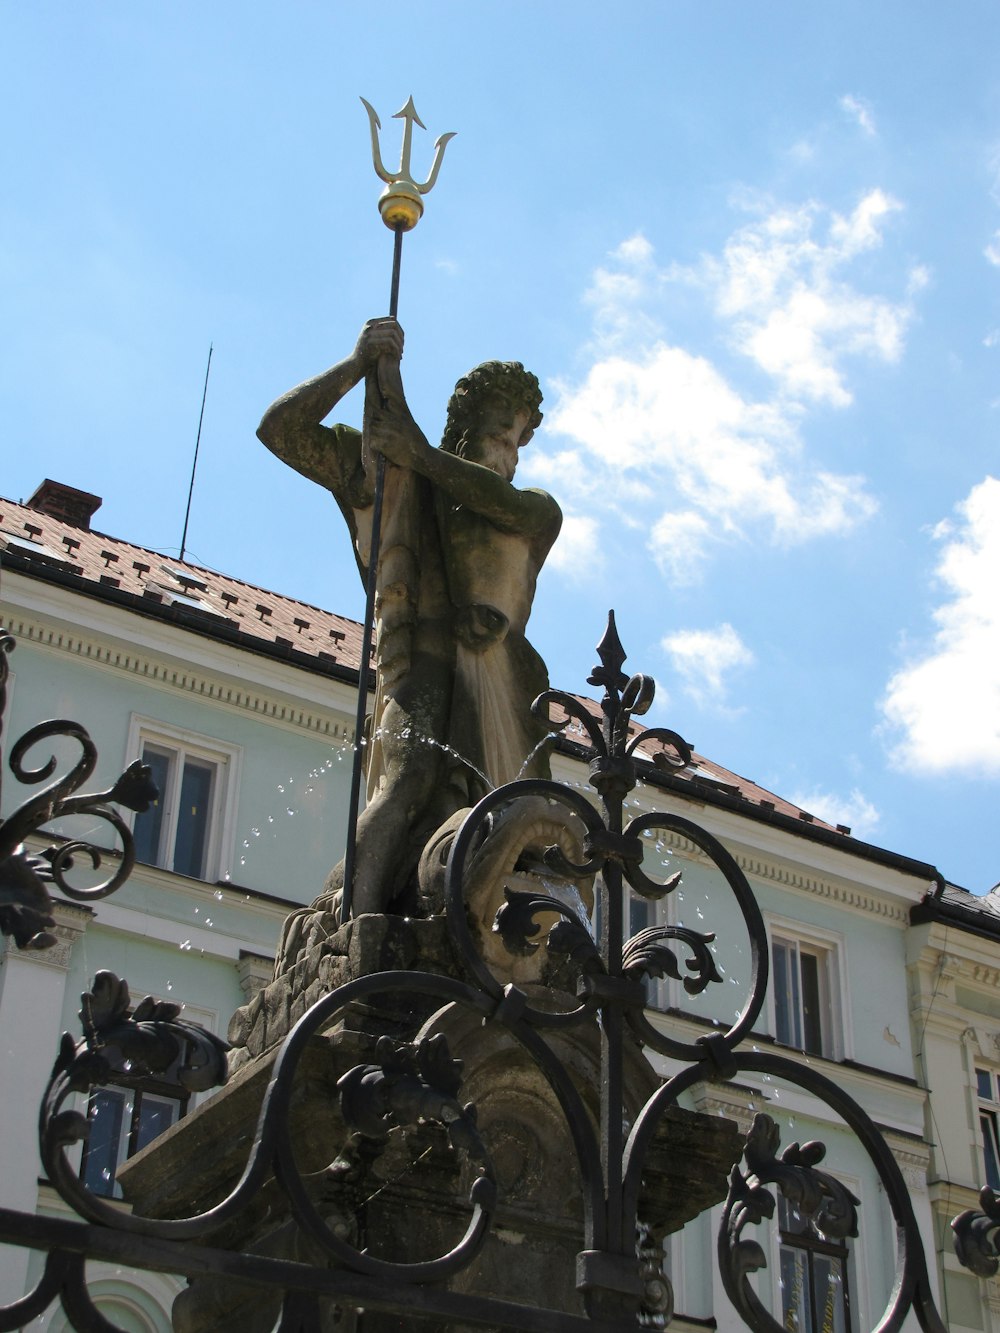 a statue of a person holding a cross on a building